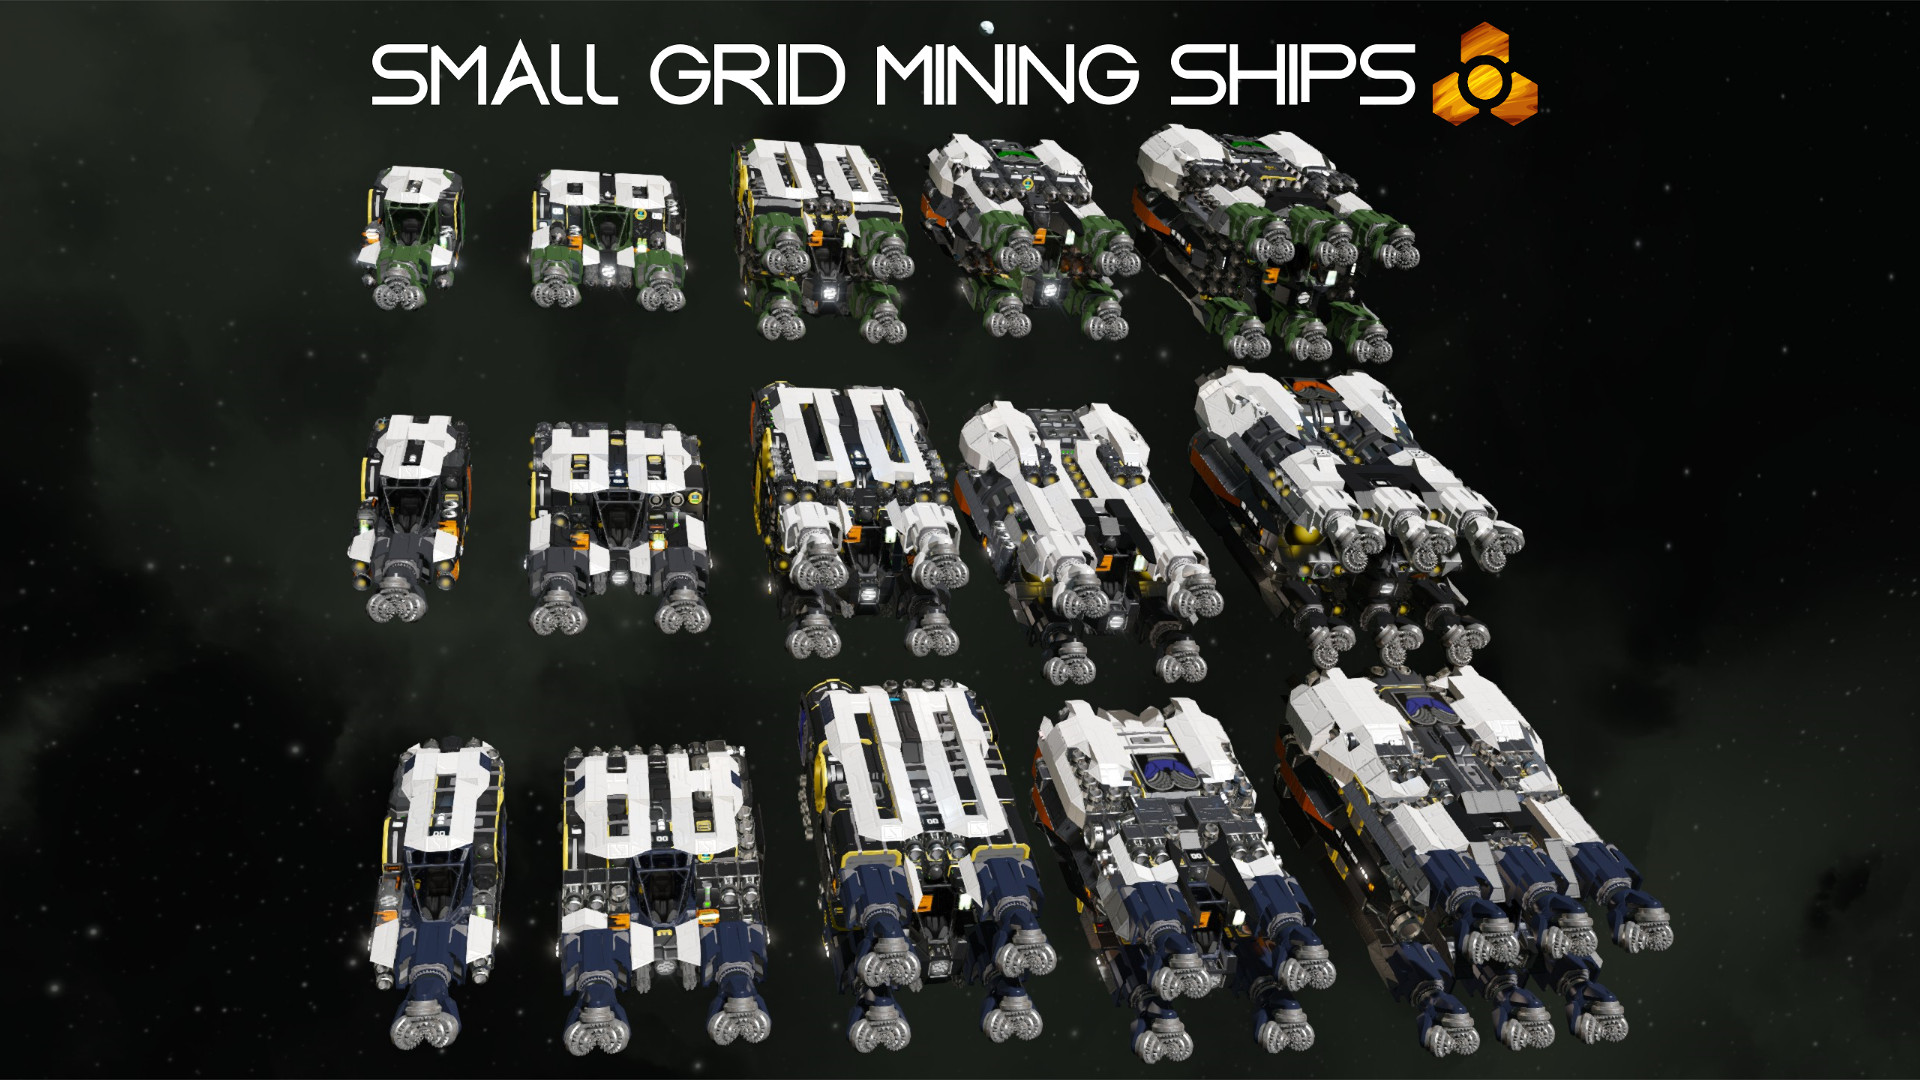 Small Grid Mining Ship User Guide for Space Engineers